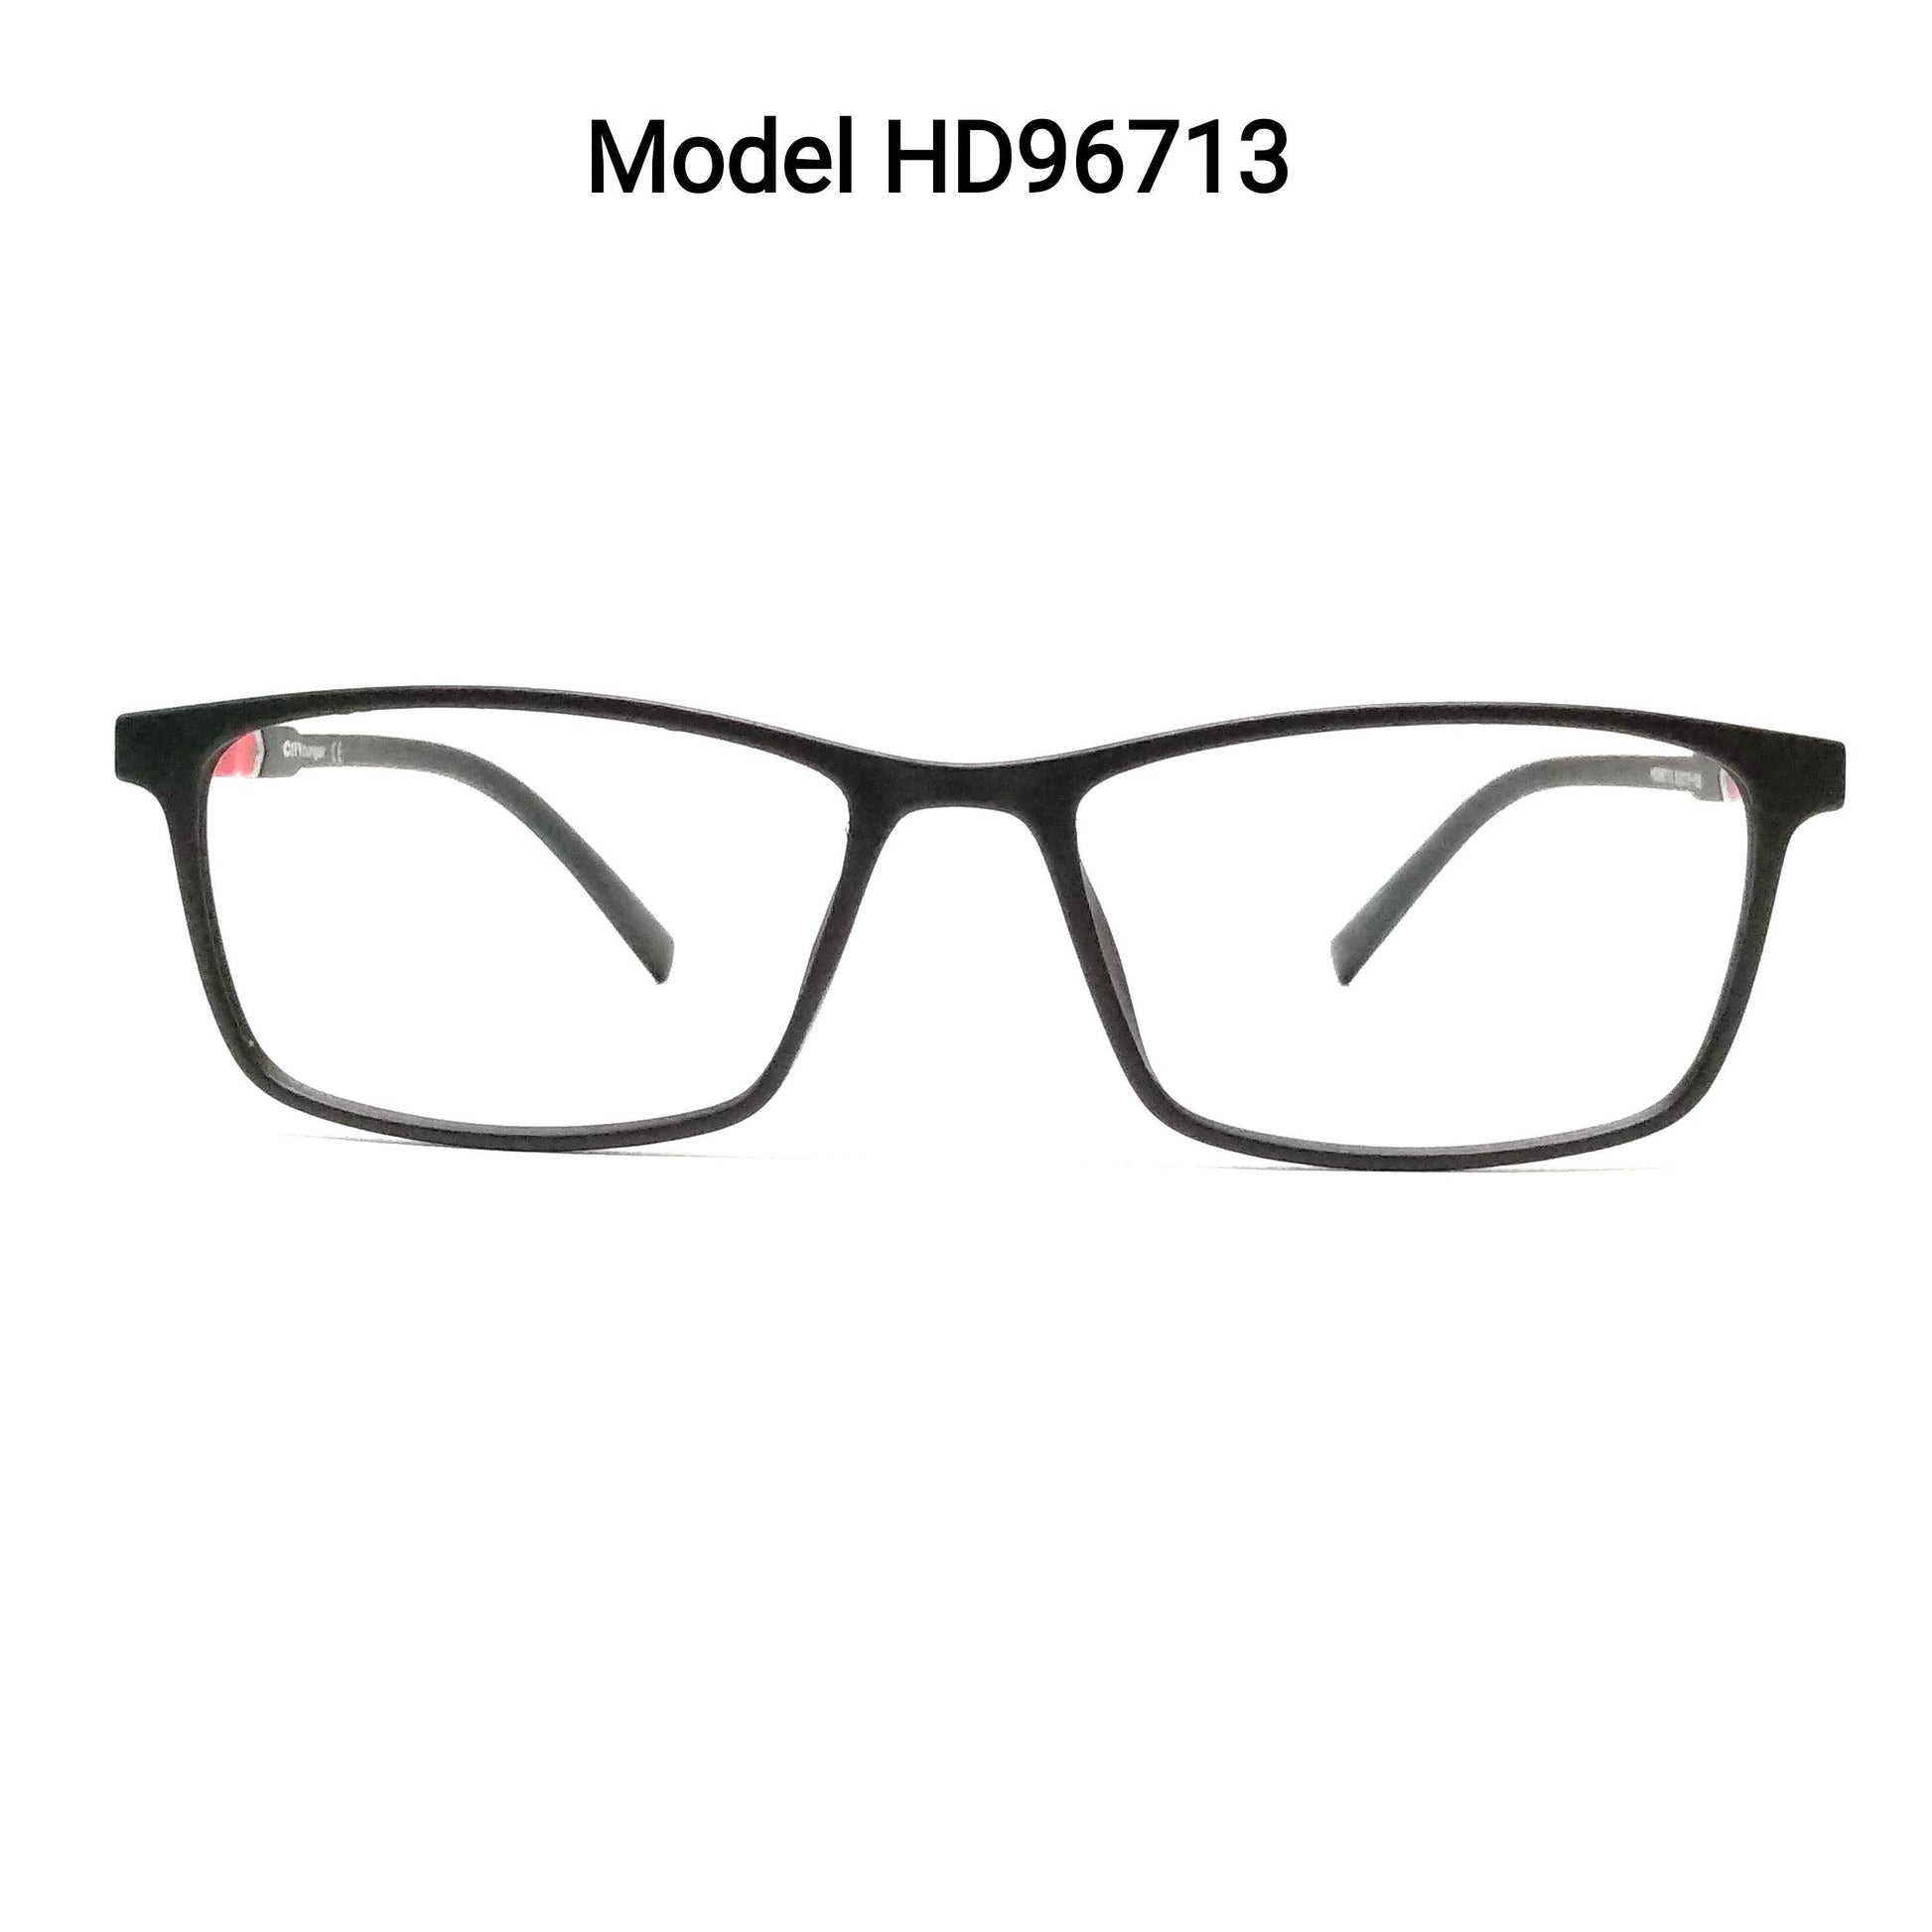 Buy HD Ultra Thin Lightweight TR90 Spectacle Frame Glasses for Men Women HD96713C3 - Glasses India Online in India